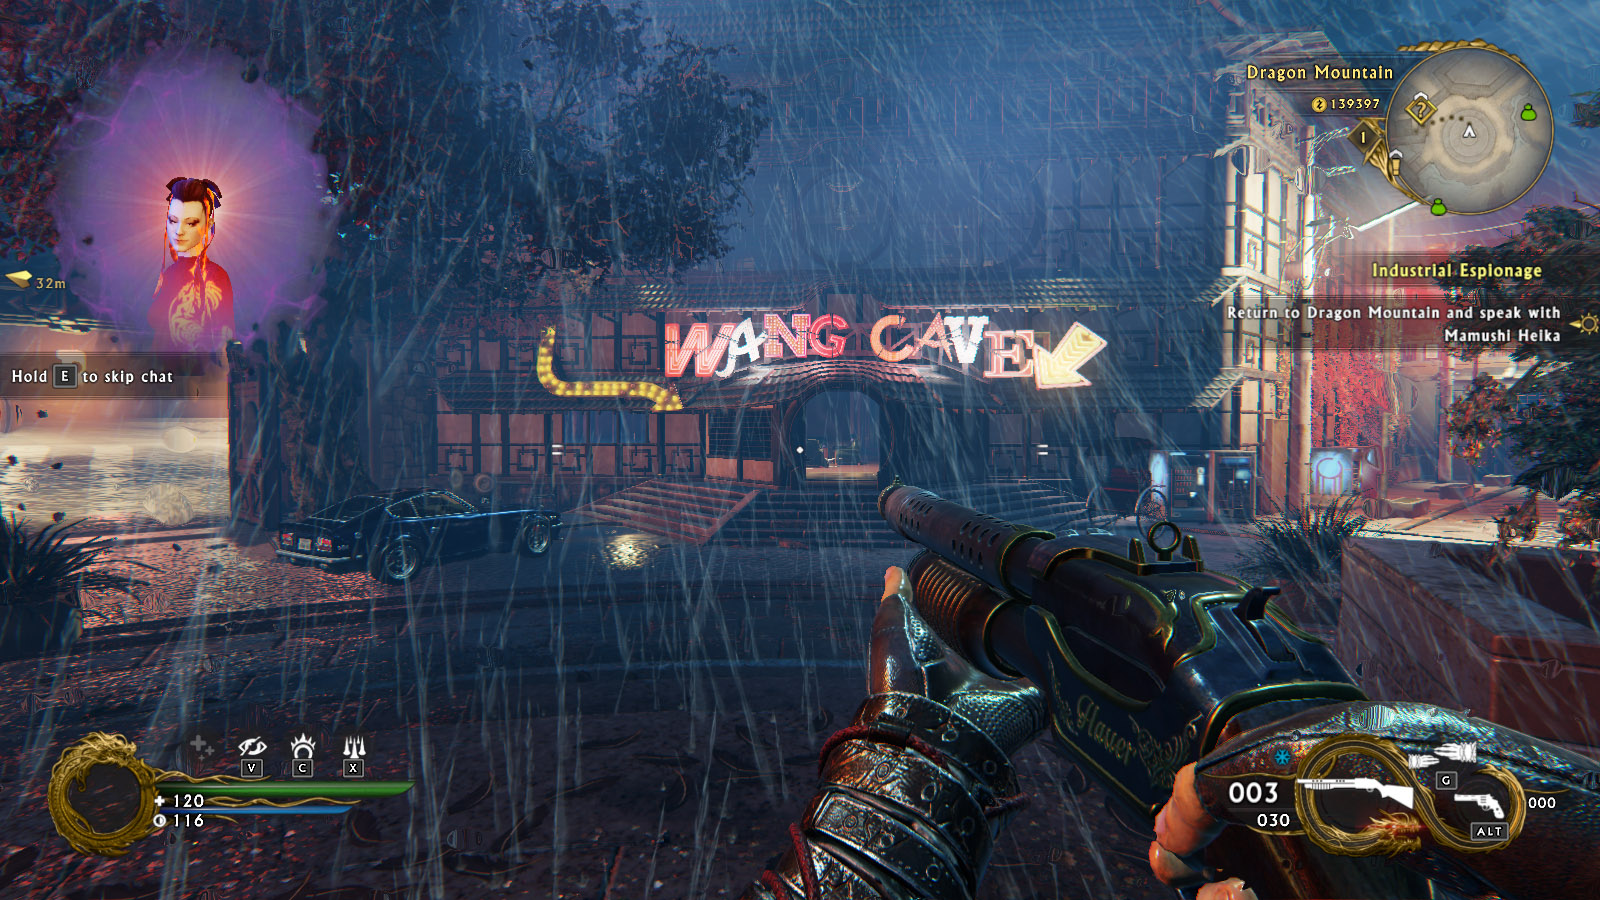 Shadow Warrior 2 [PC] review: a shallow, mind-numbing spectacle - Gearburn